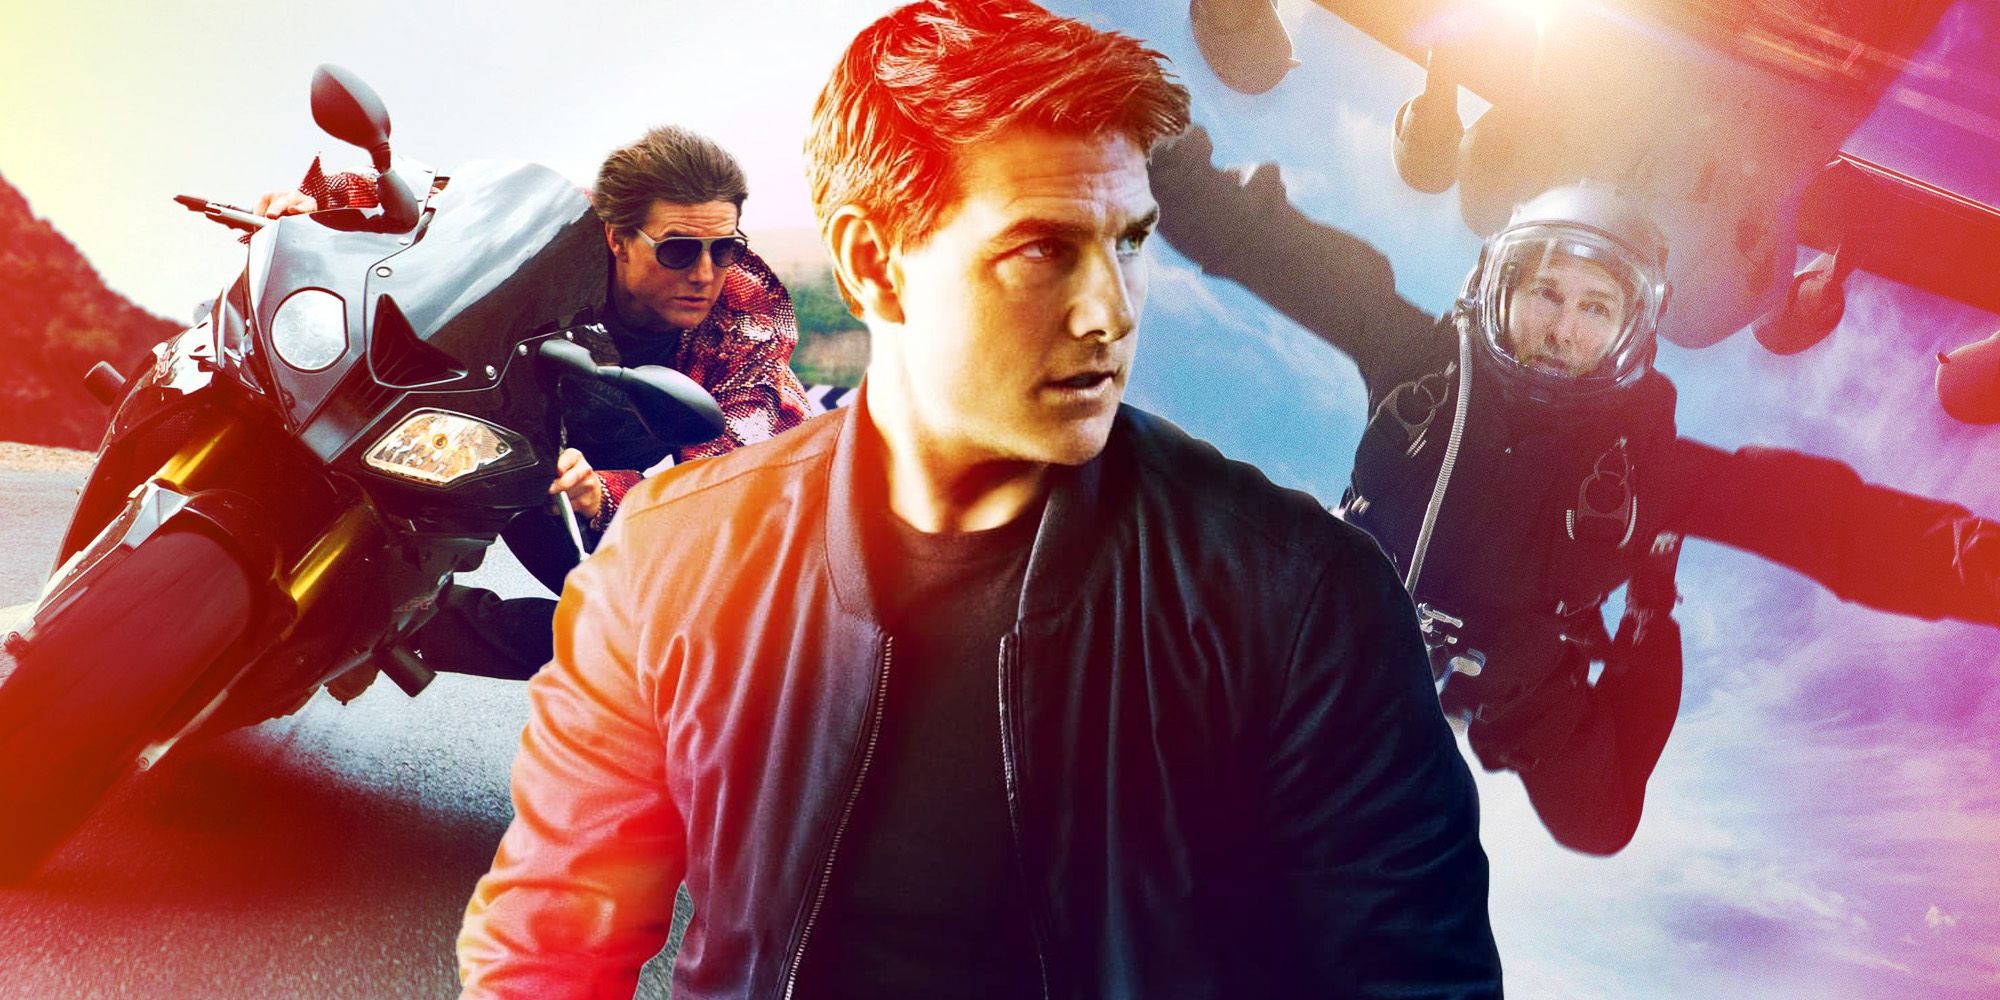 Tom Cruise Mission Impossible stunts ranked